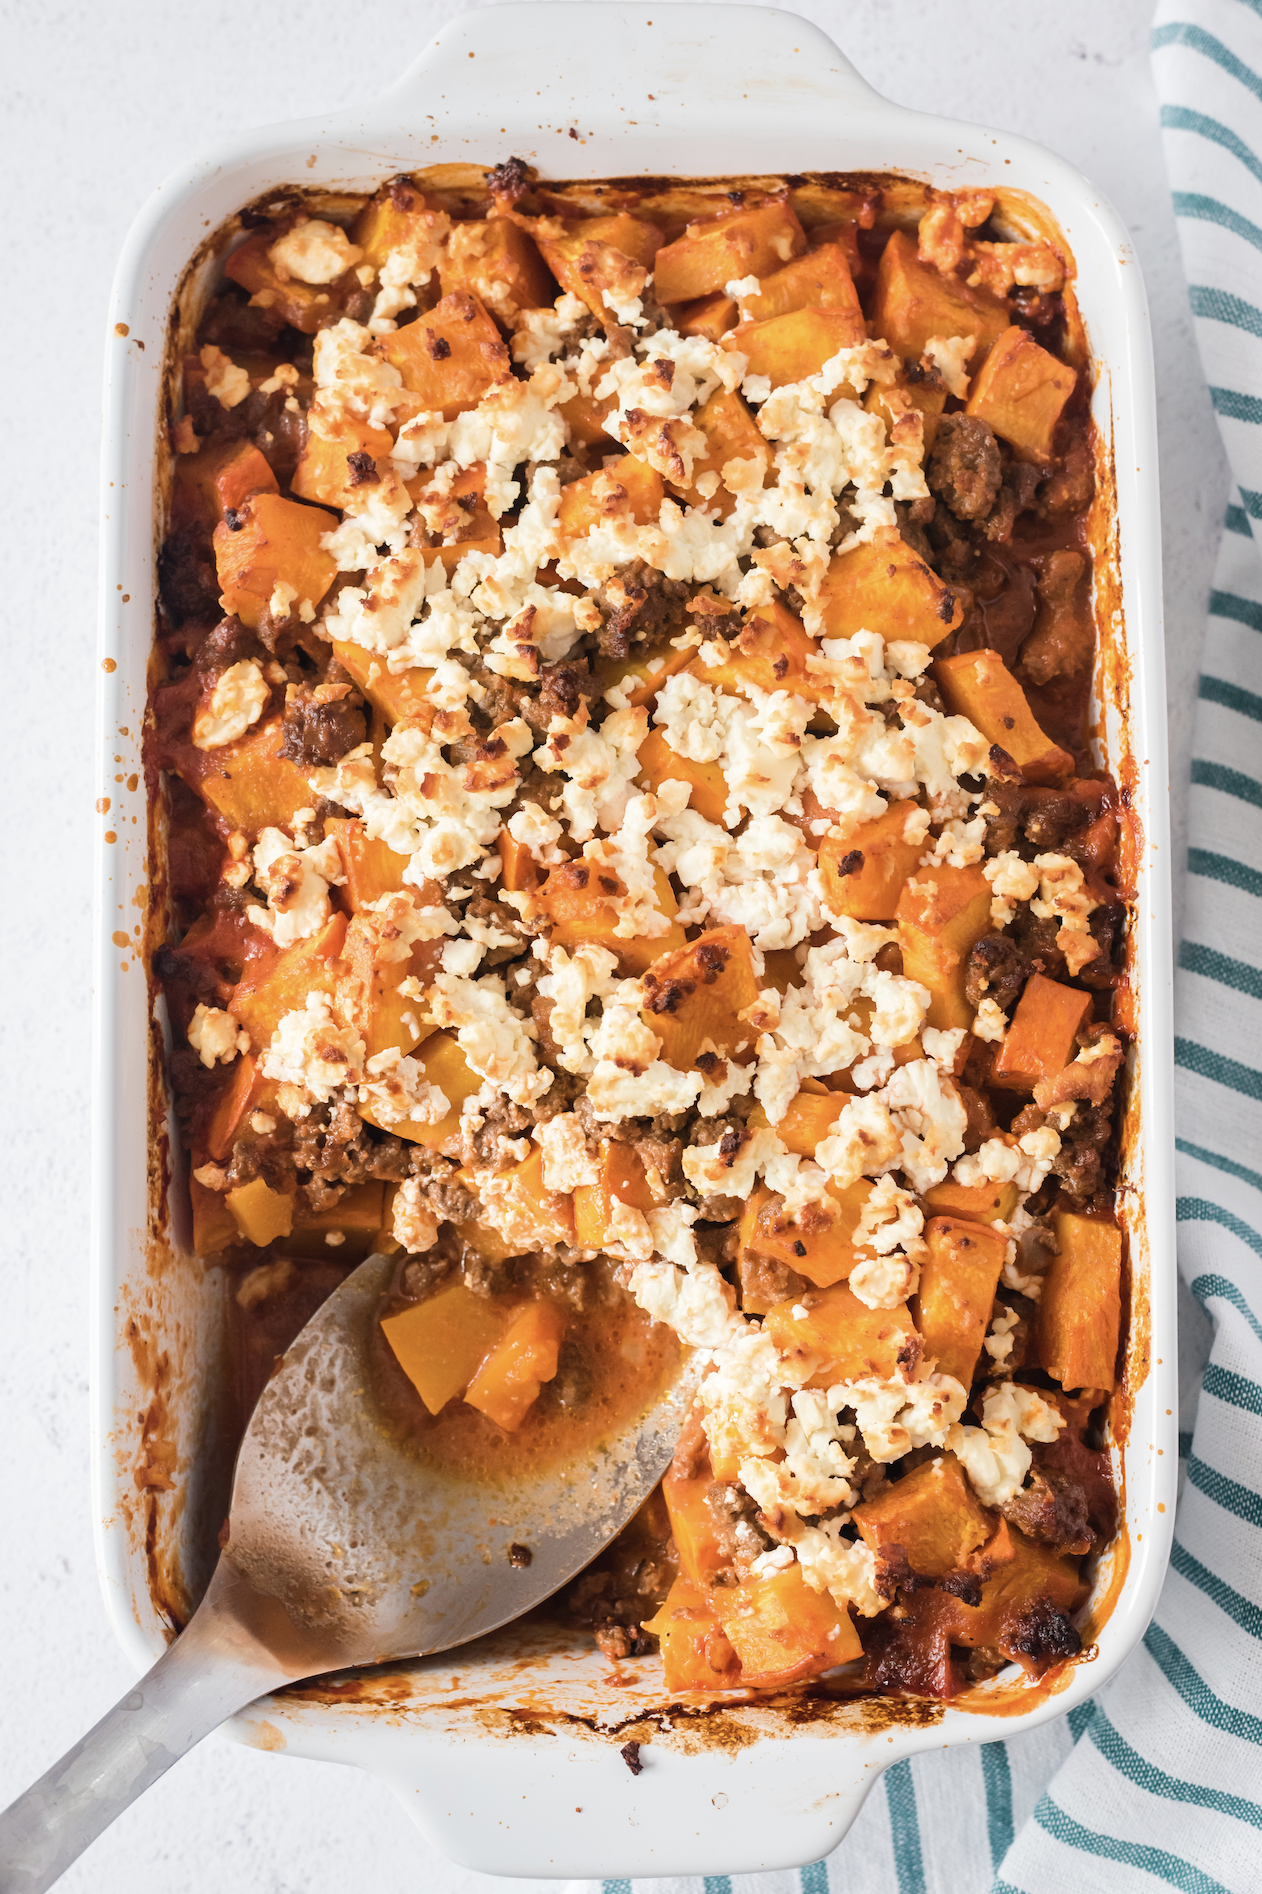 Bring pumpkin to your dinner table this fall with this delicious and savory pumpkin ground beef casserole dish!